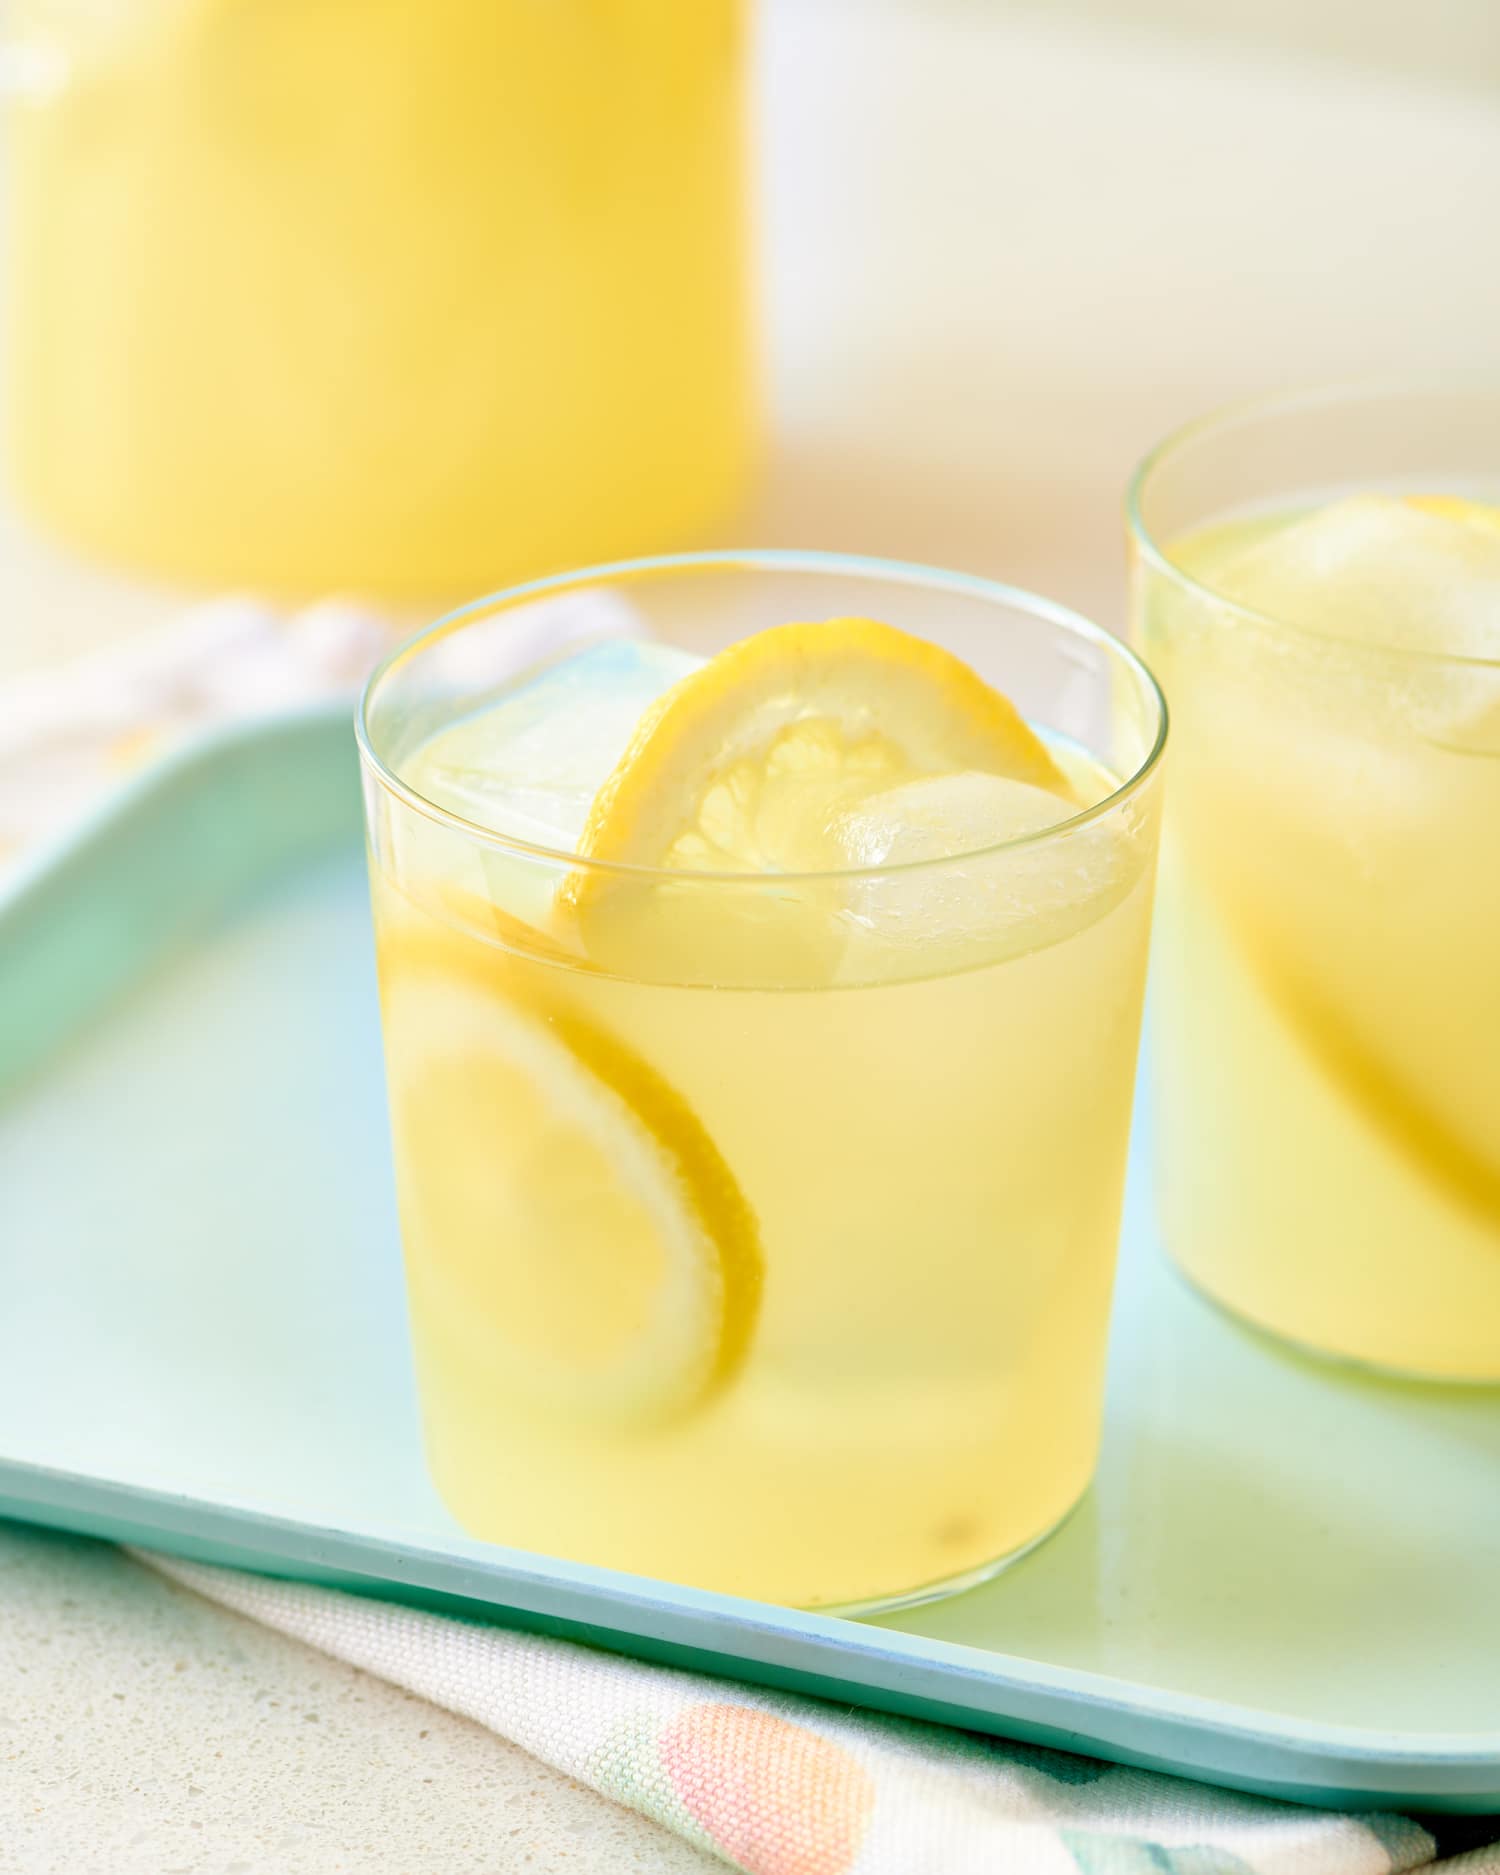 How To Make Lemonade from Scratch | Kitchn